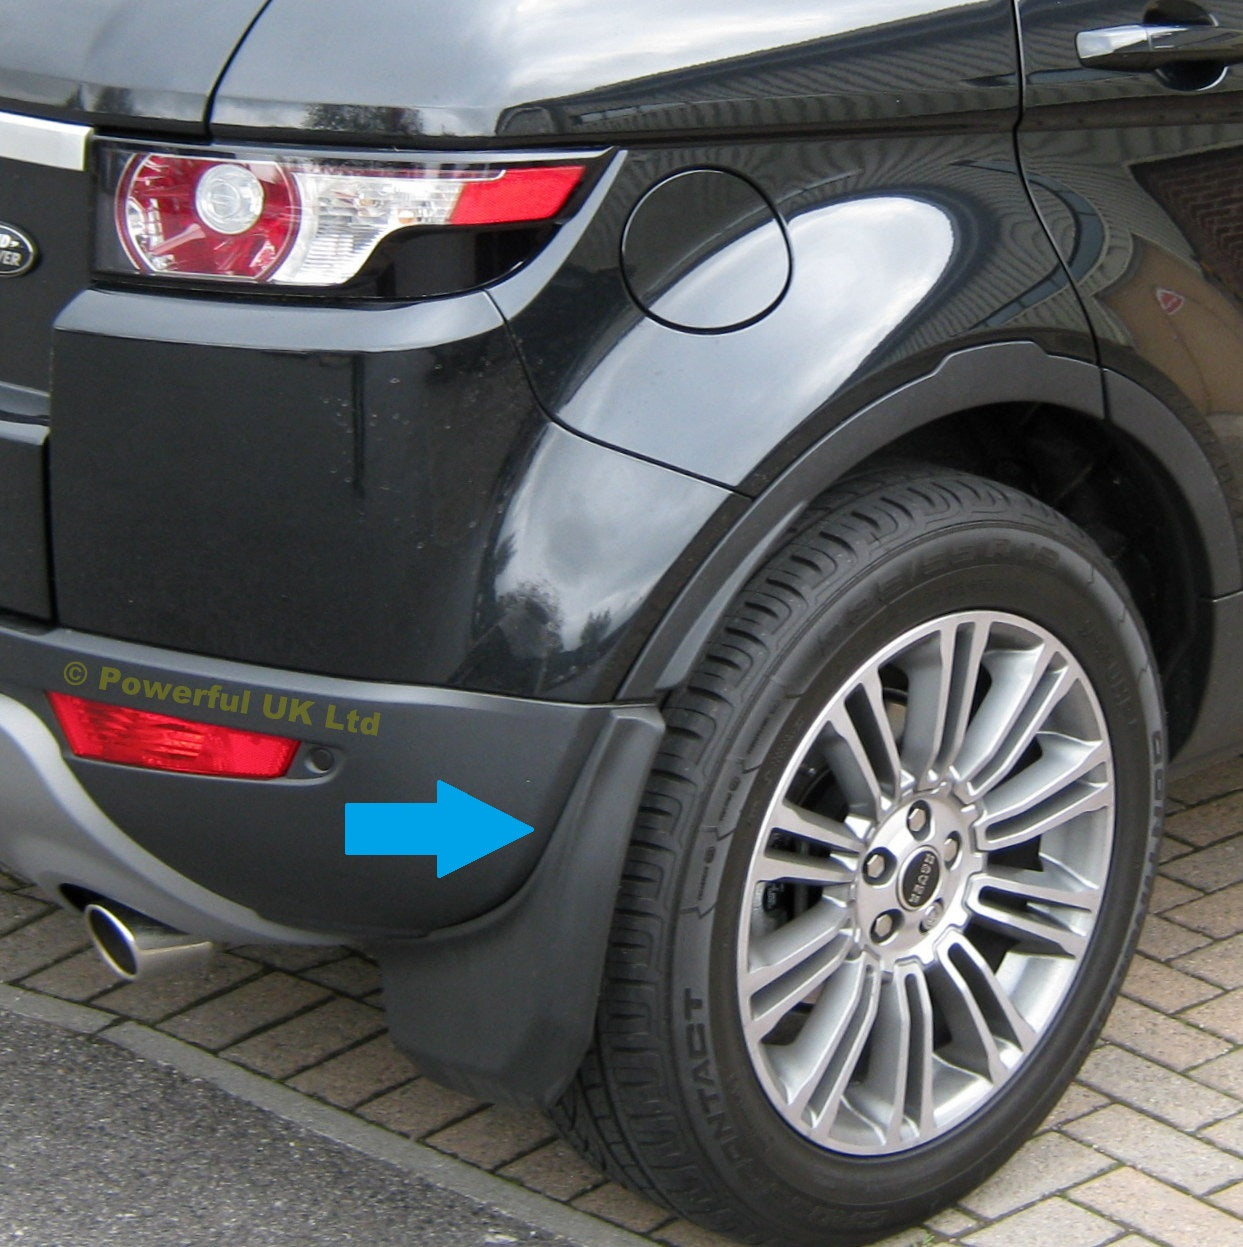 Clearance - Mudflaps (aftermarket) for Rear of Range Rover Evoque Pure/Prestige - Missing fixings and side tabs